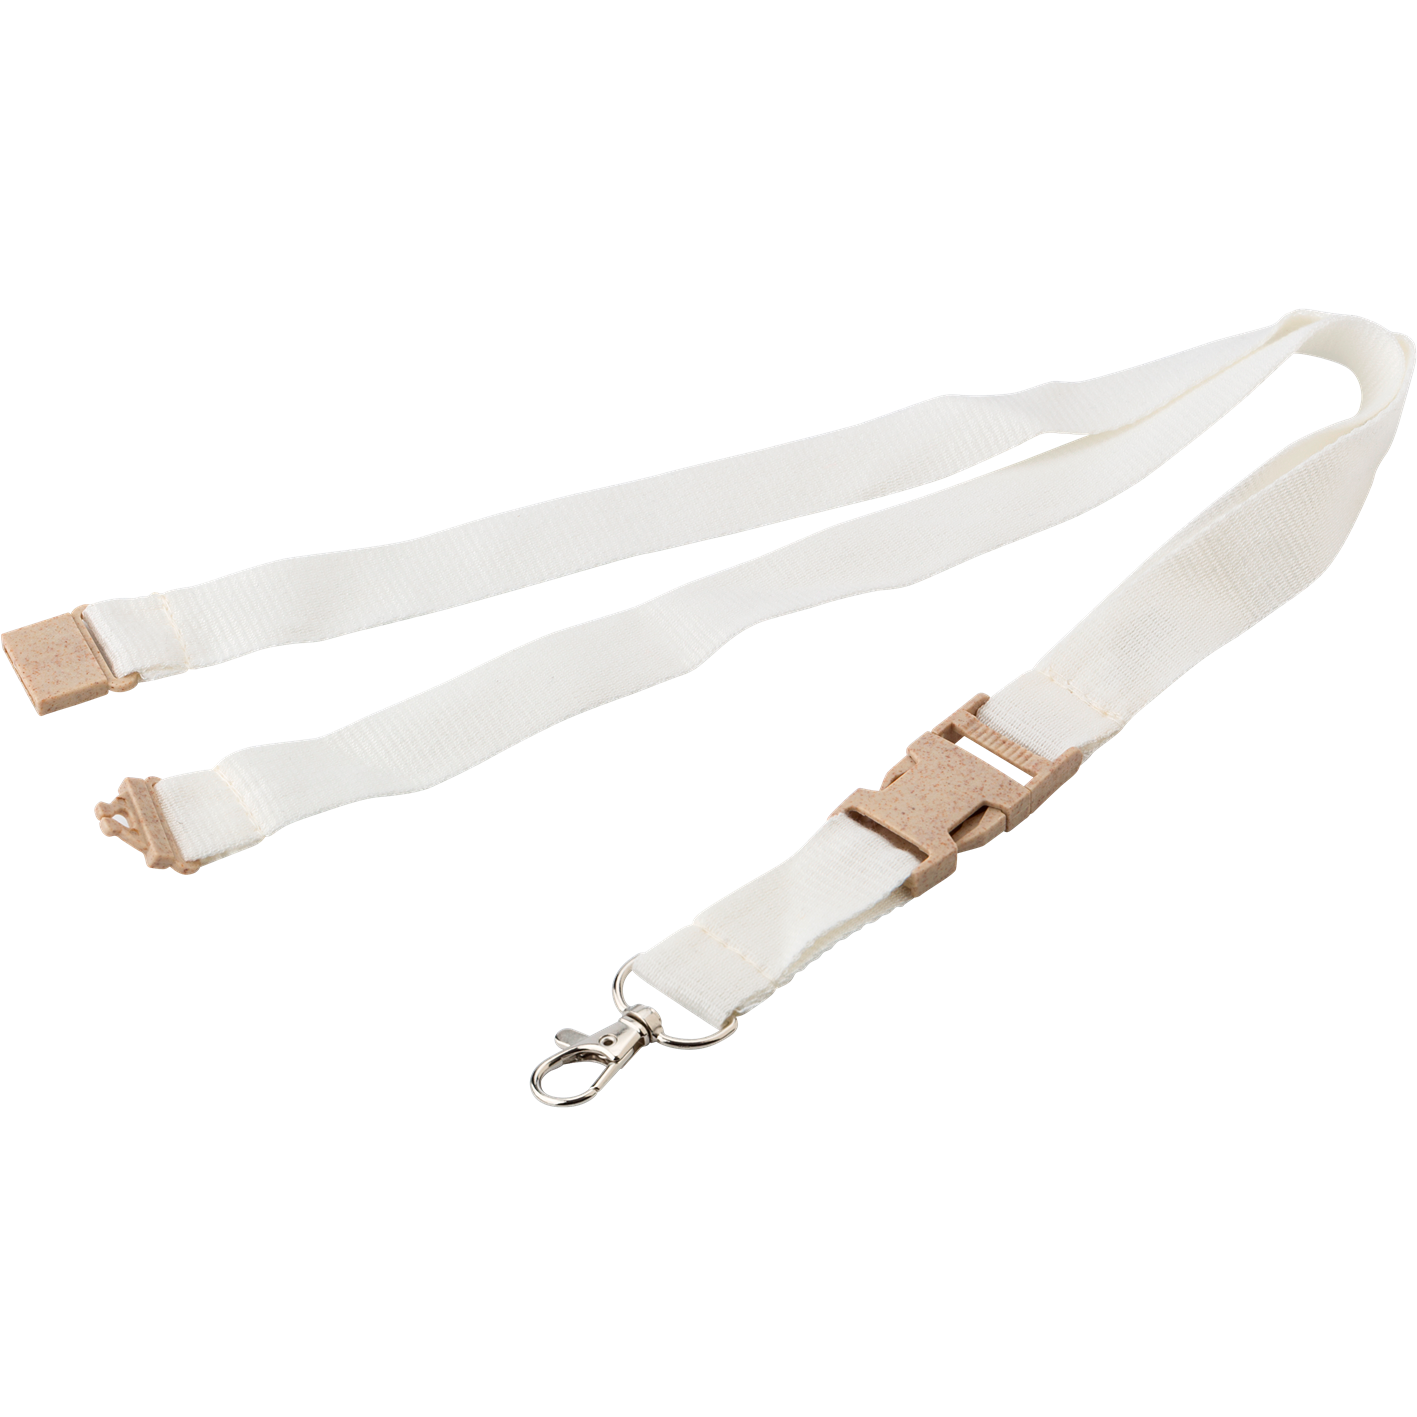 Bamboo lanyard with Wheat Straw Clips Lanyards   